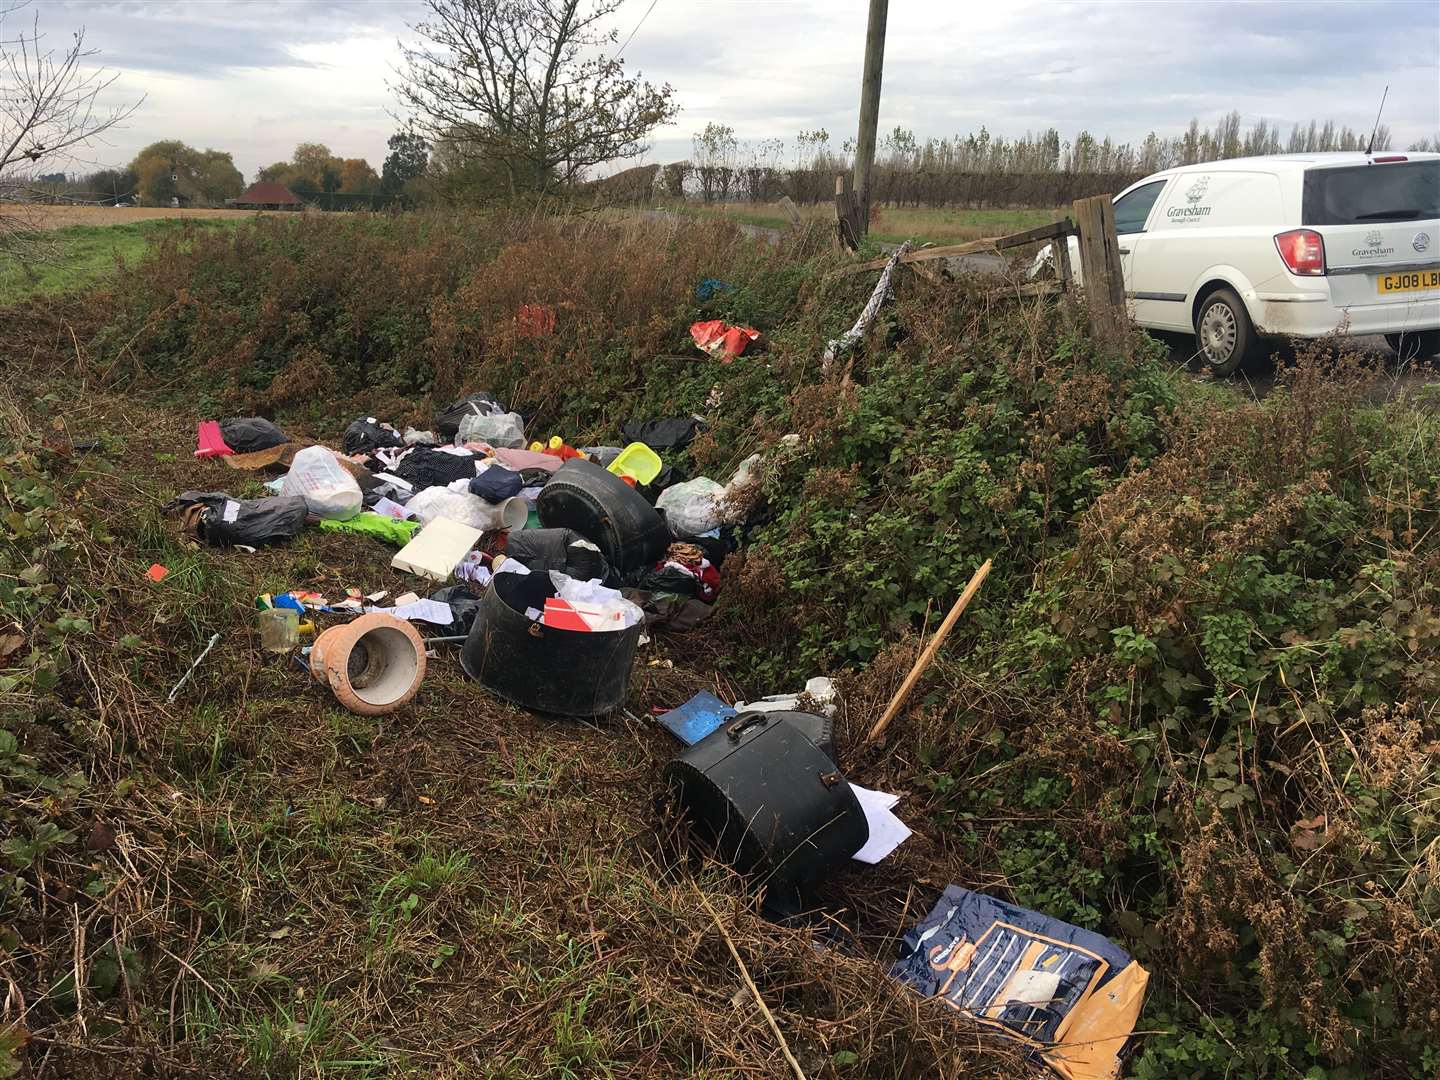 Ricky Hutchinson has been convicted over flytipping in Gravesham. Picture: Gravesham Council